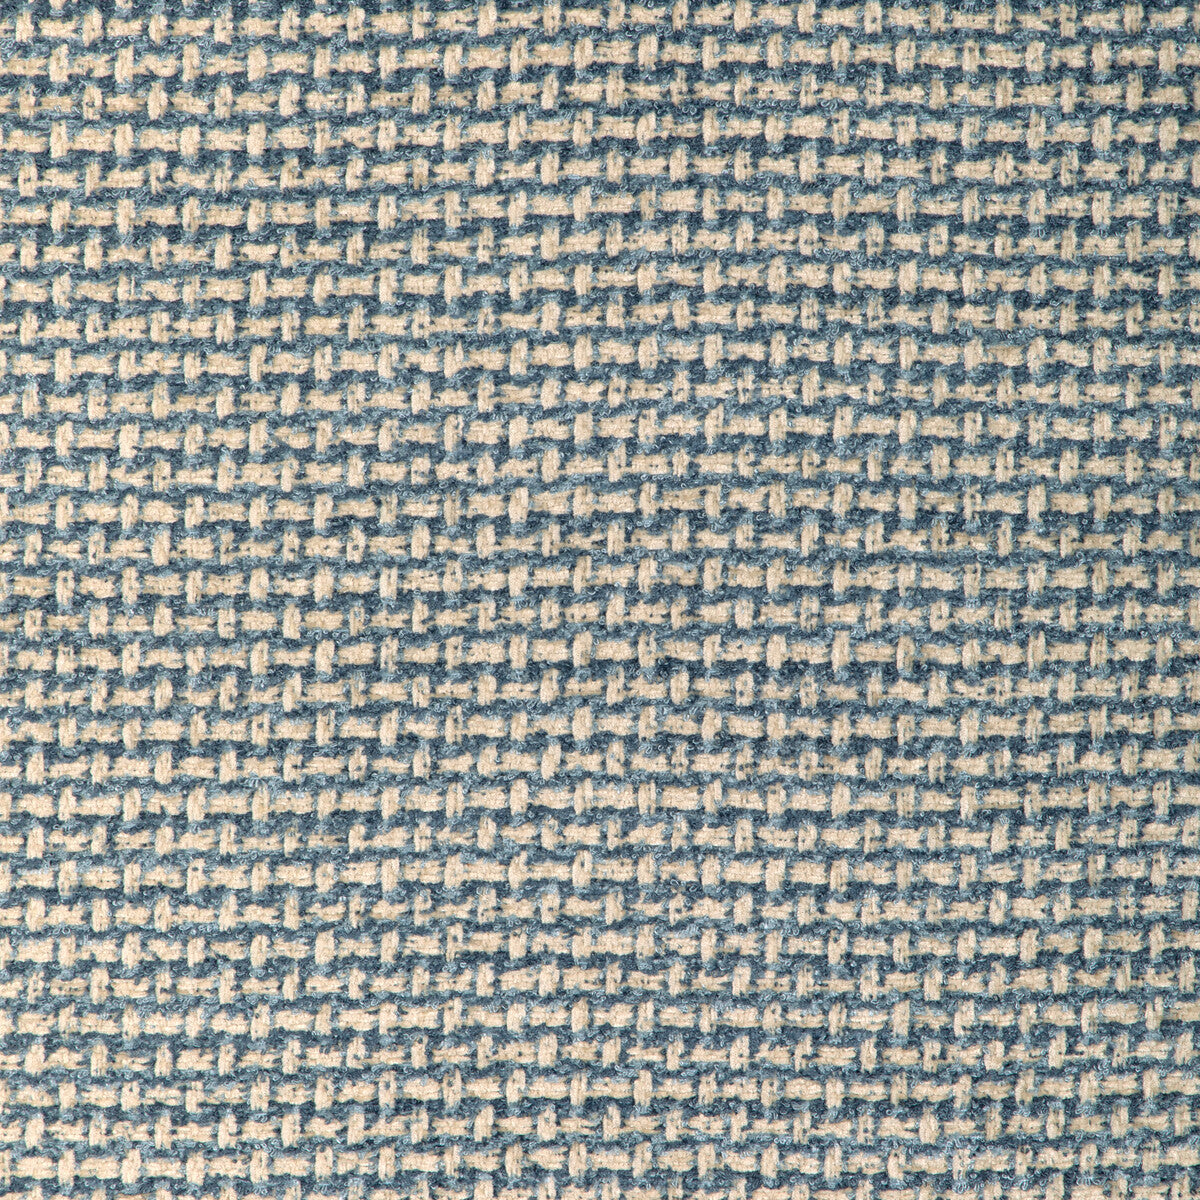 Nivolet Texture fabric in blue color - pattern 8023154.516.0 - by Brunschwig &amp; Fils in the Chambery Textures IV collection